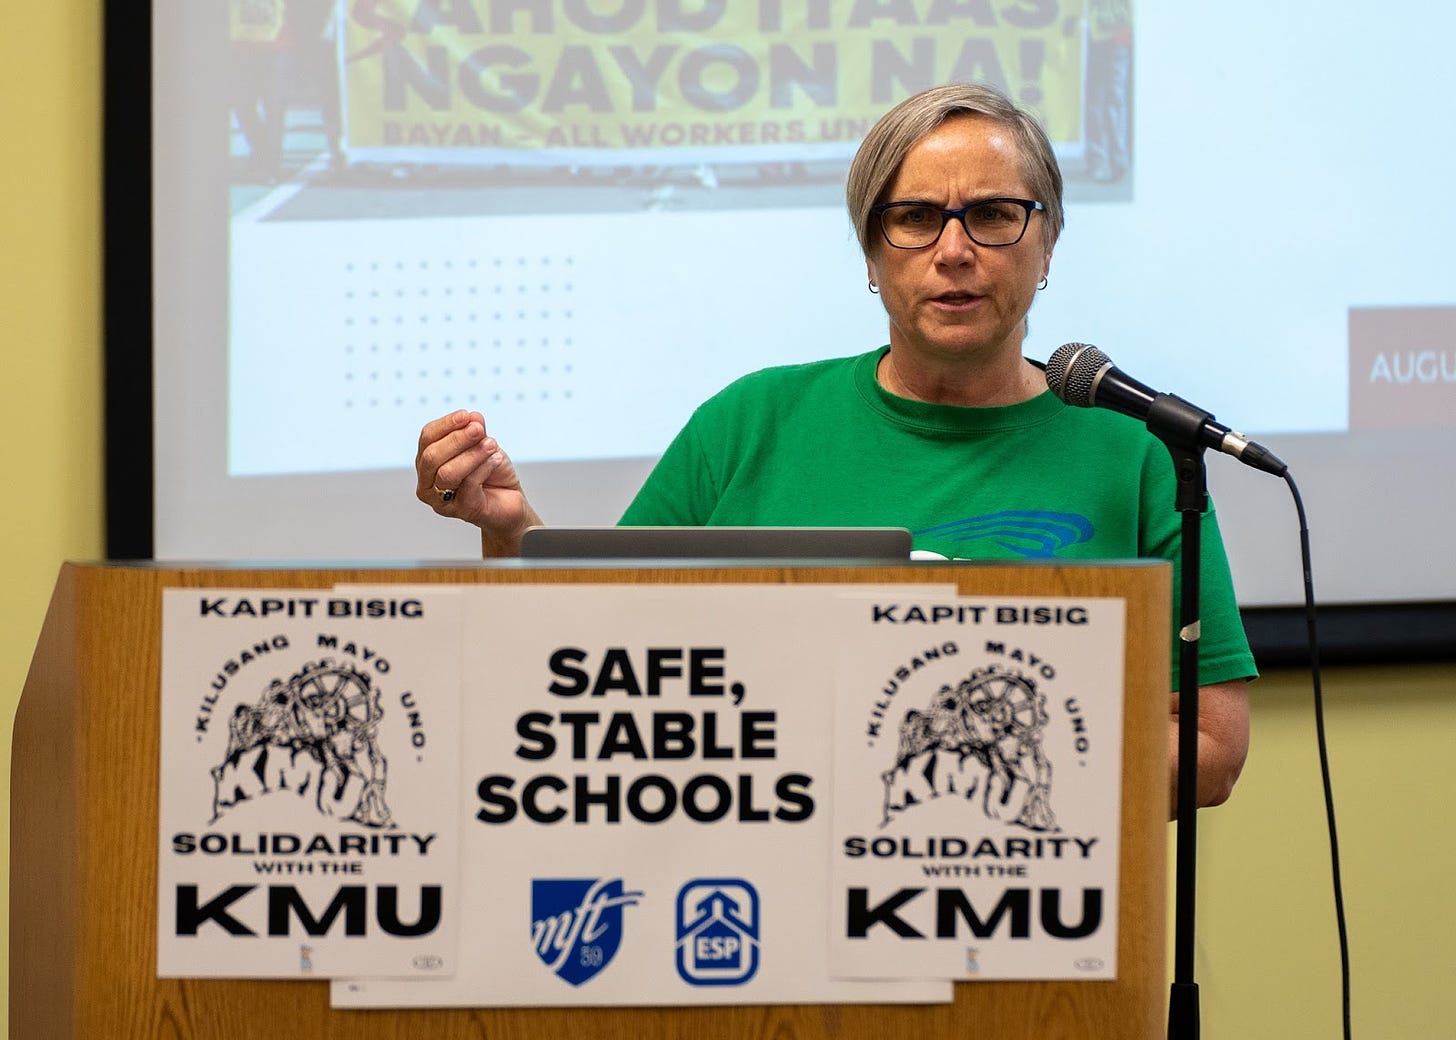 A white woman with short gray hair and glasses wearing a green tee shirt stands behind a wooden podium with posters reading "Kapit Bisig solidarity with the KMU" and "Safe, stable schools"